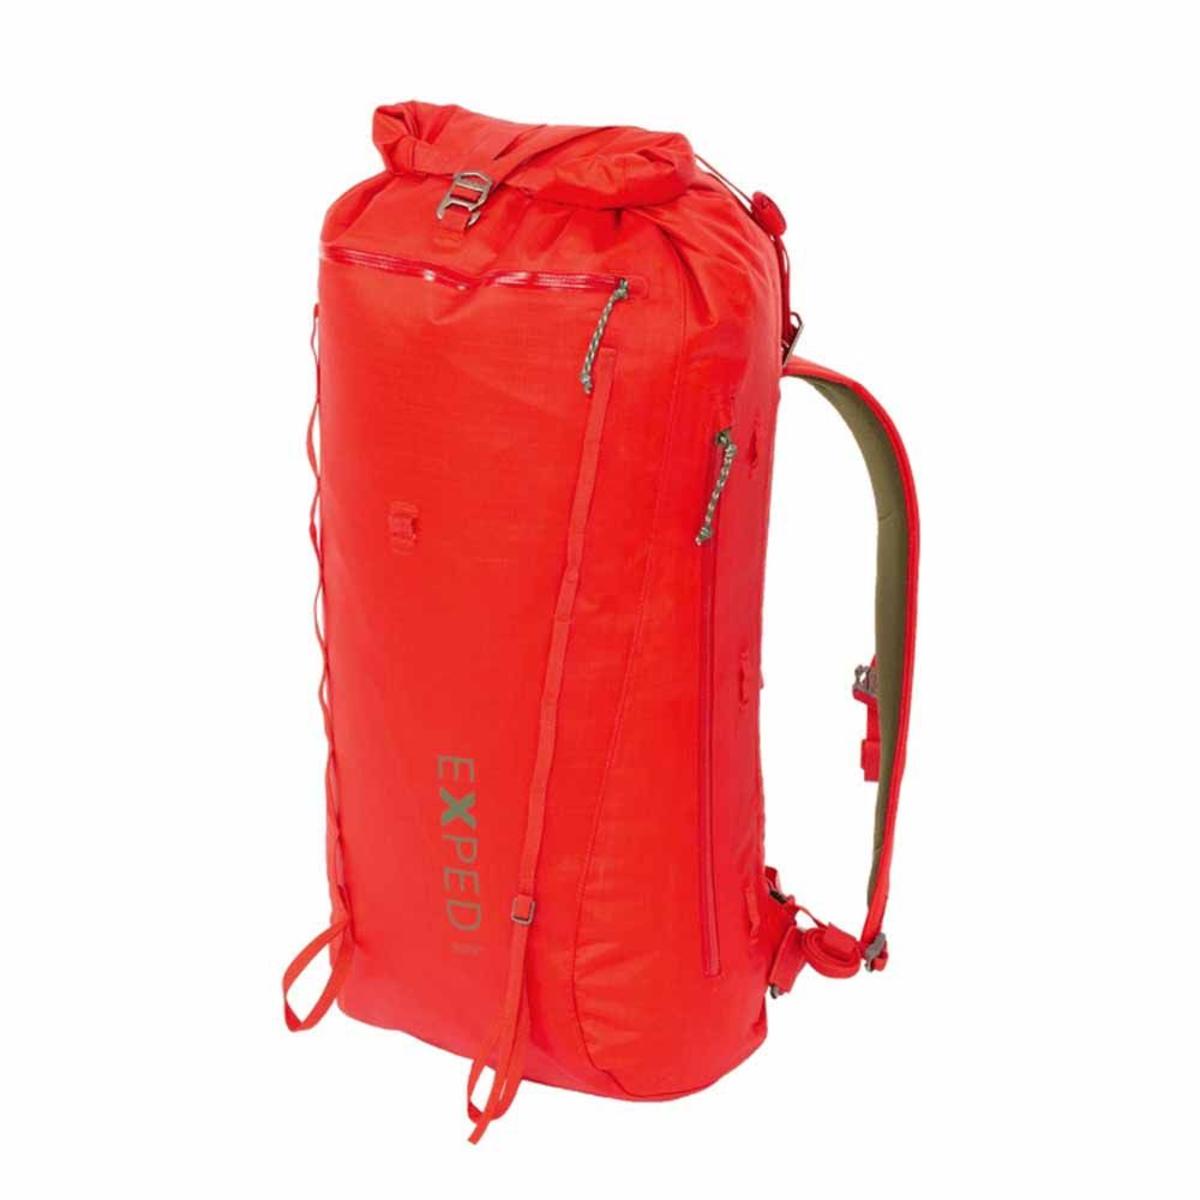 Exped Serac 35L Backpack